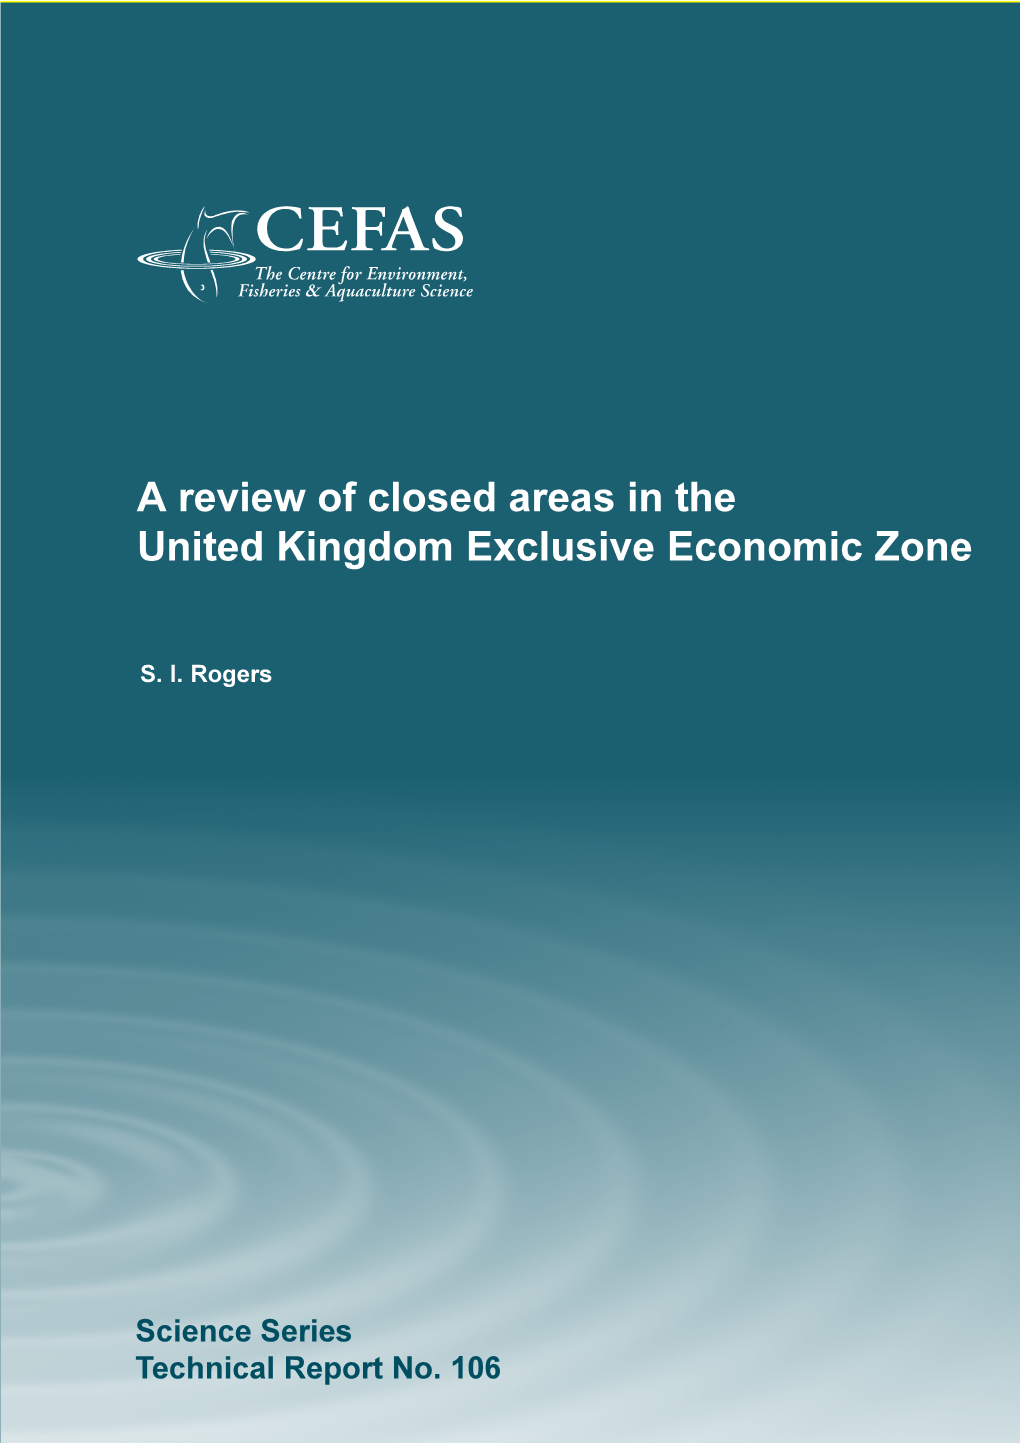 A Review of Closed Areas in the United Kingdom Exclusive Economic Zone